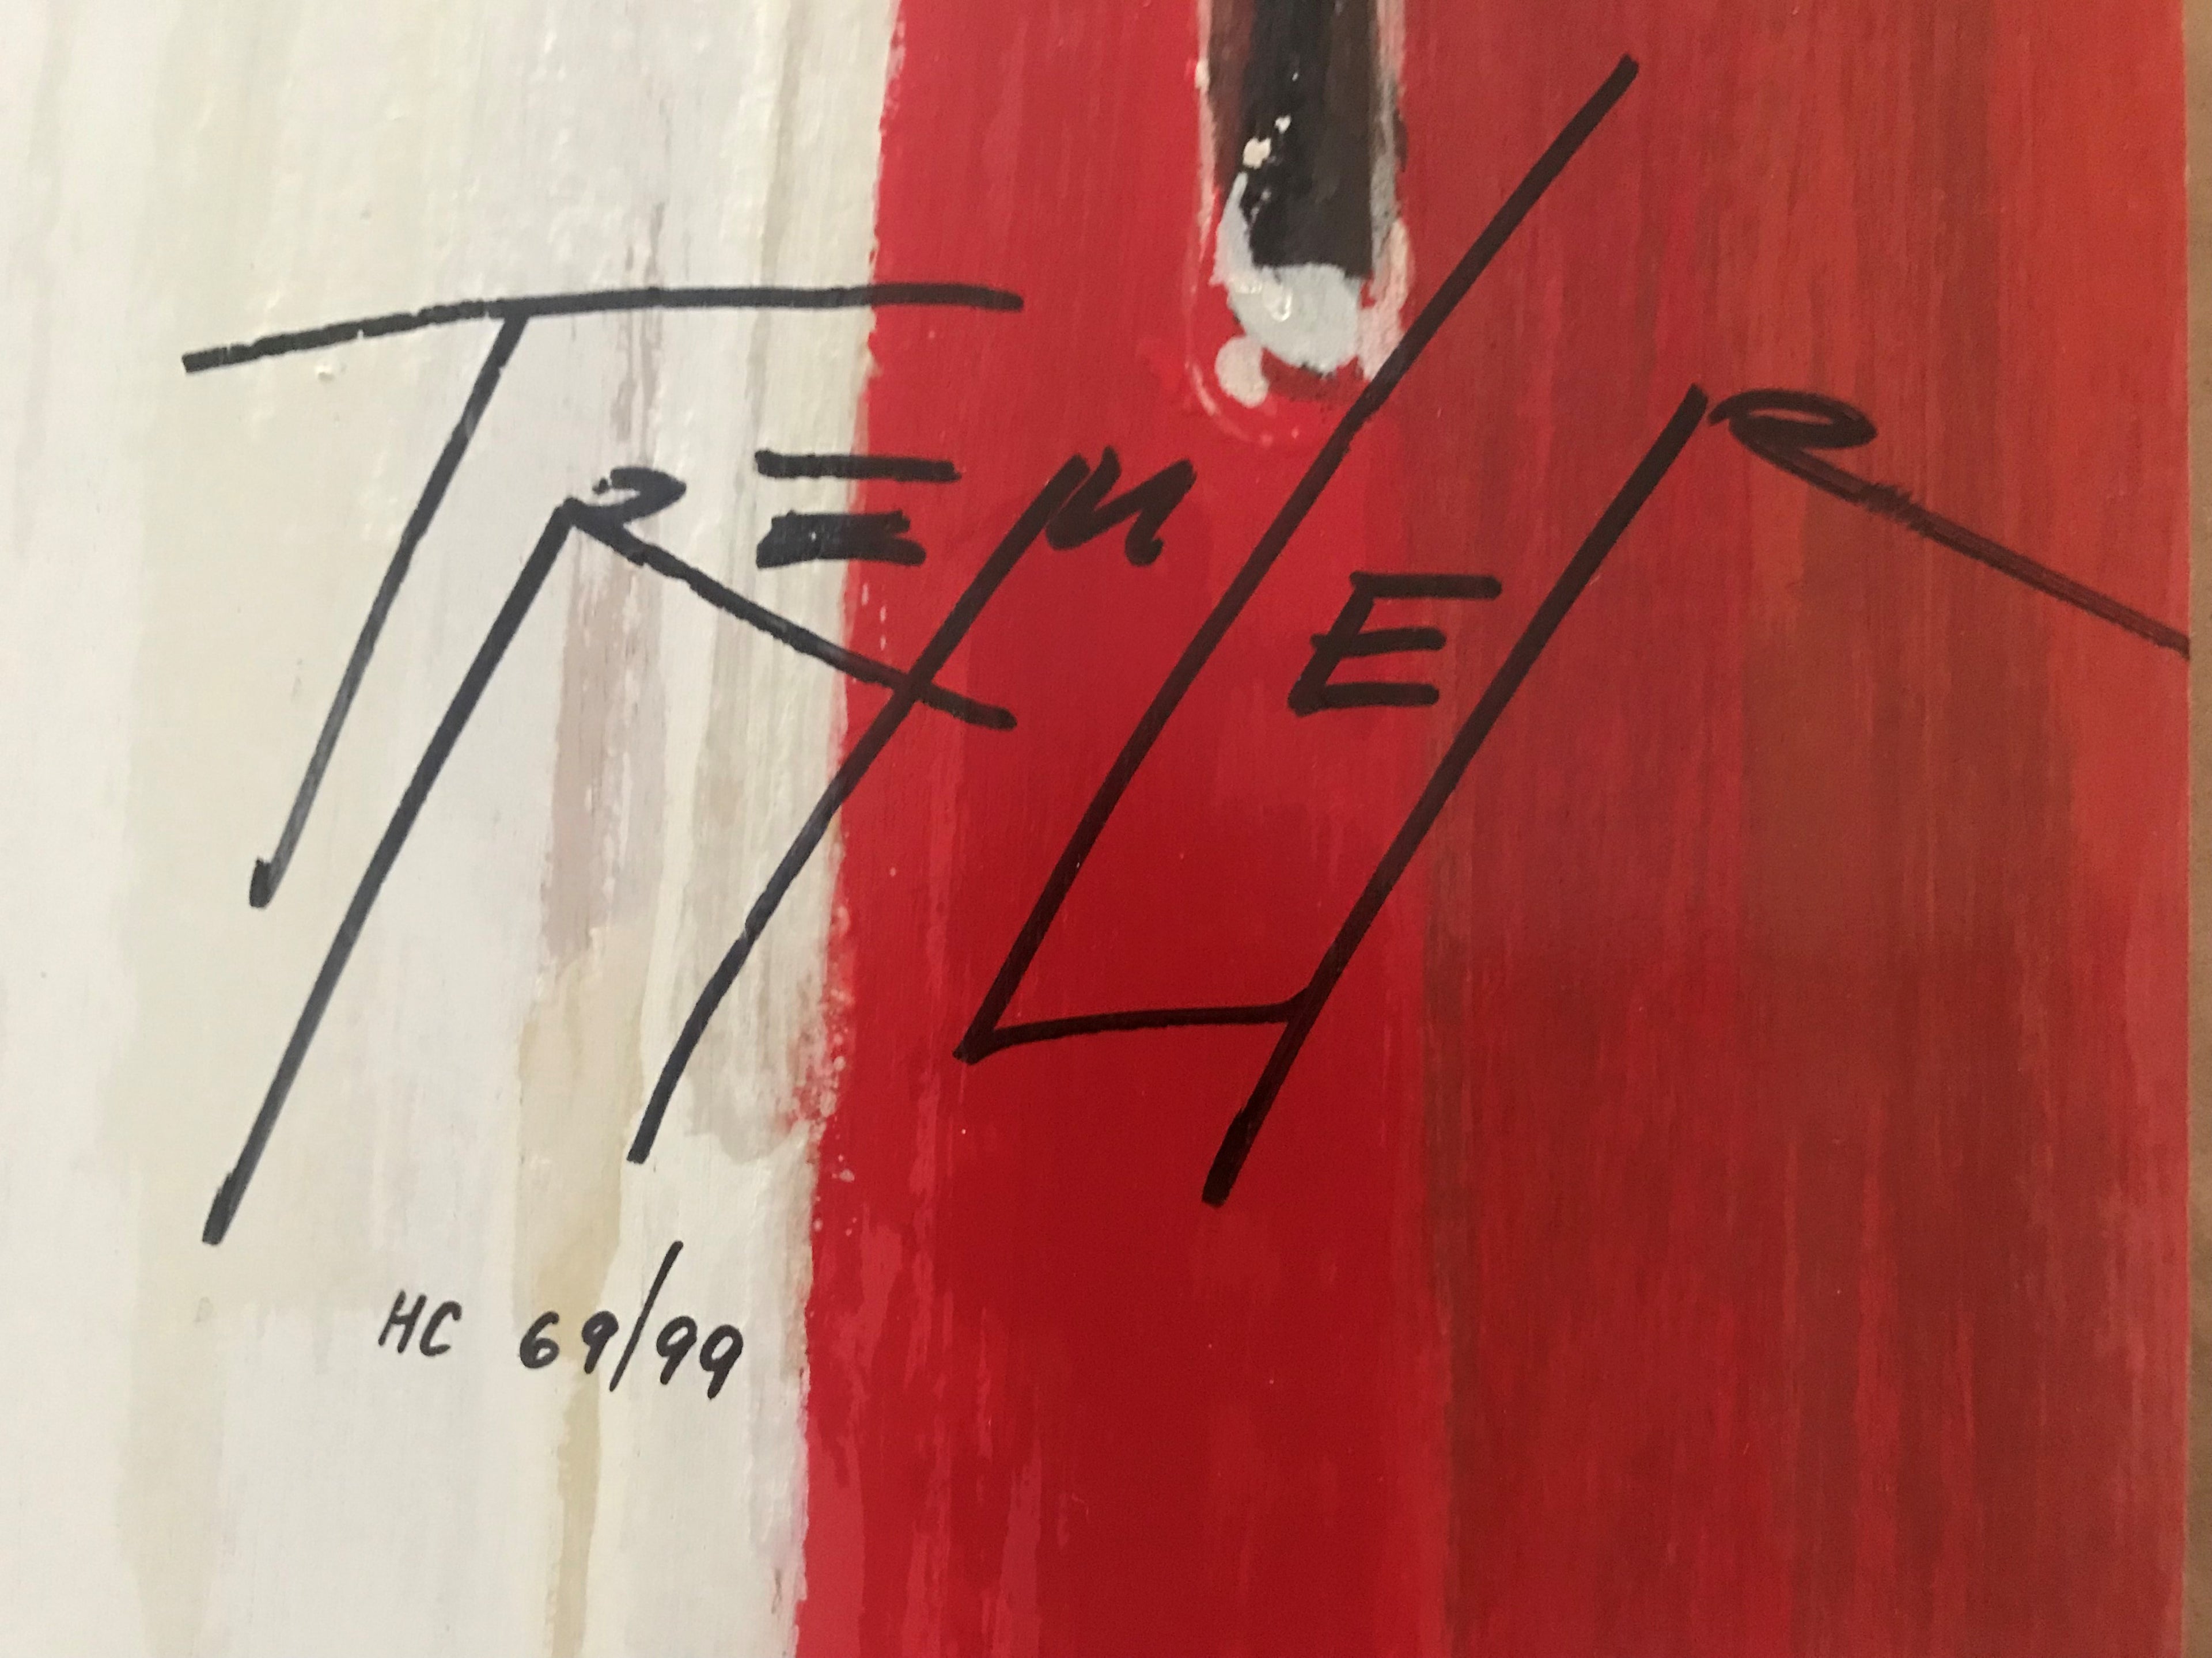 Piano in Red Yuri Tremler Hors Commerce Serigraph Print on Wood Panel Artist Hand Signed and HC Numbered